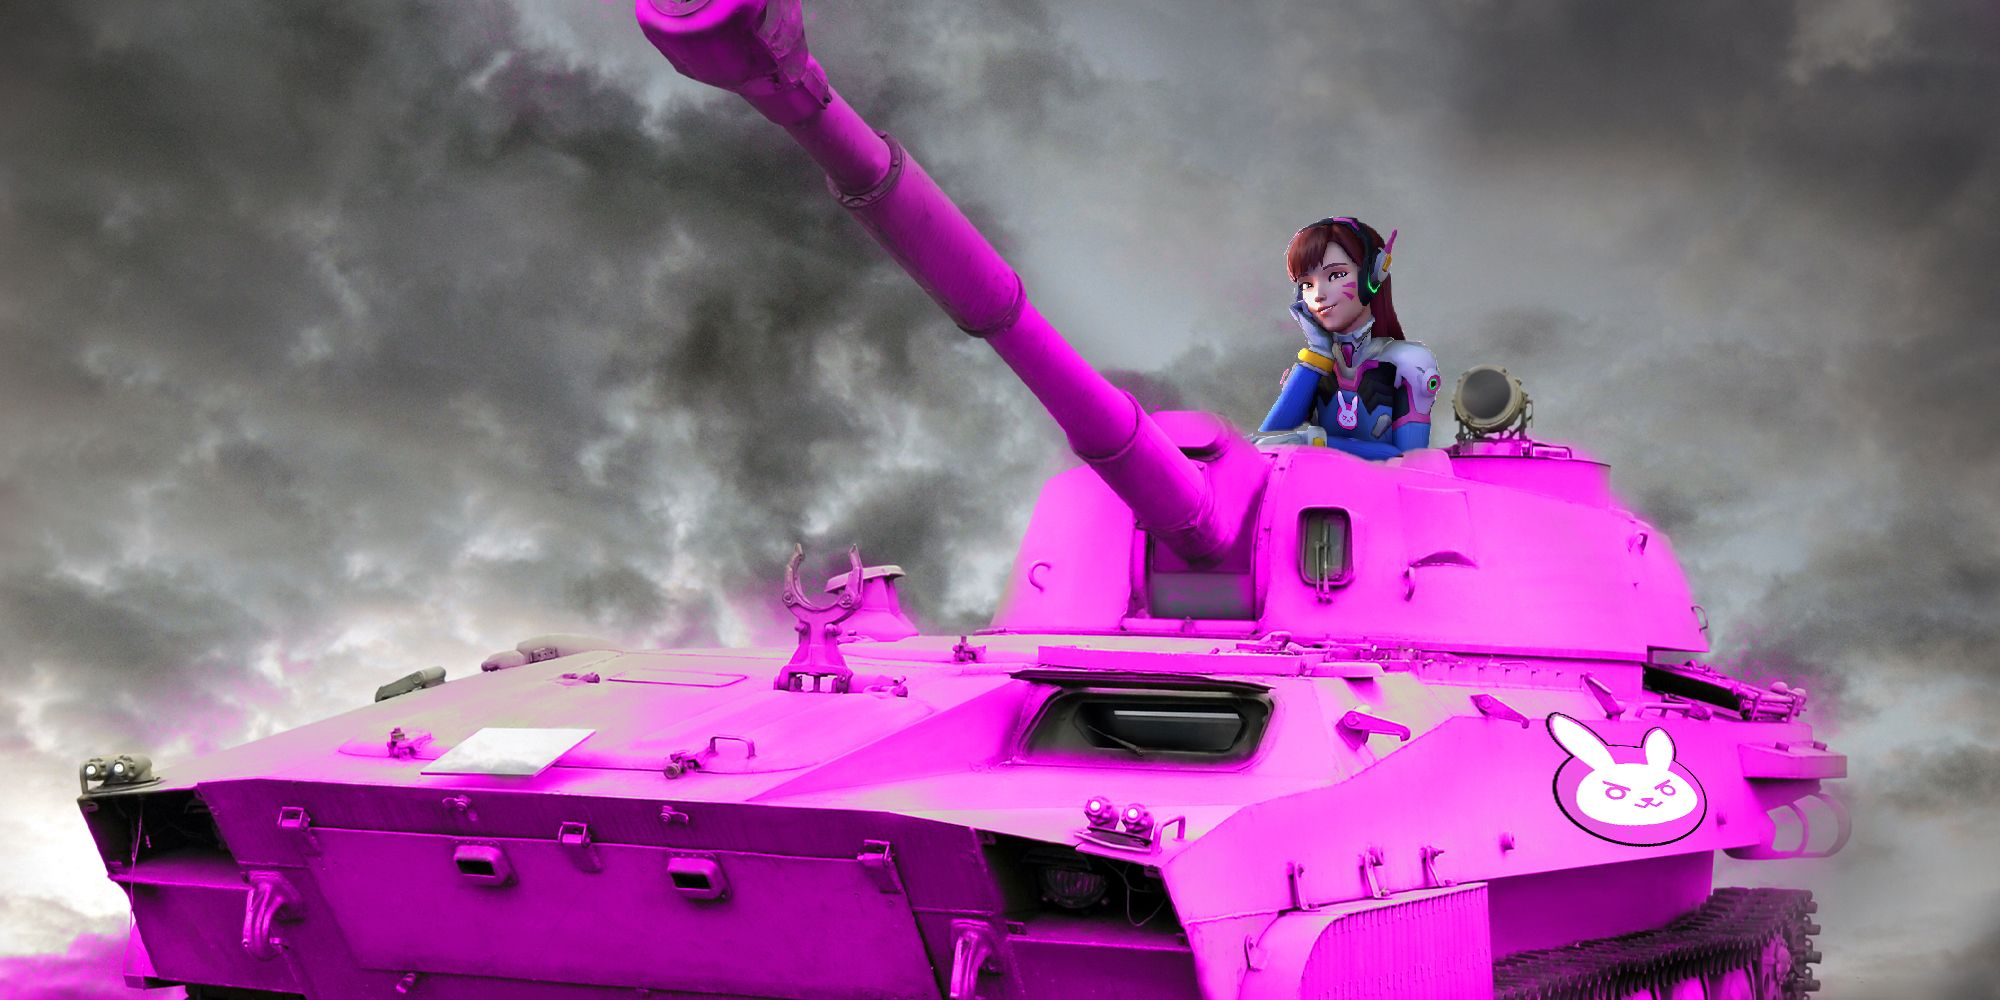 D.Va from Overwatch driving a pink military tank